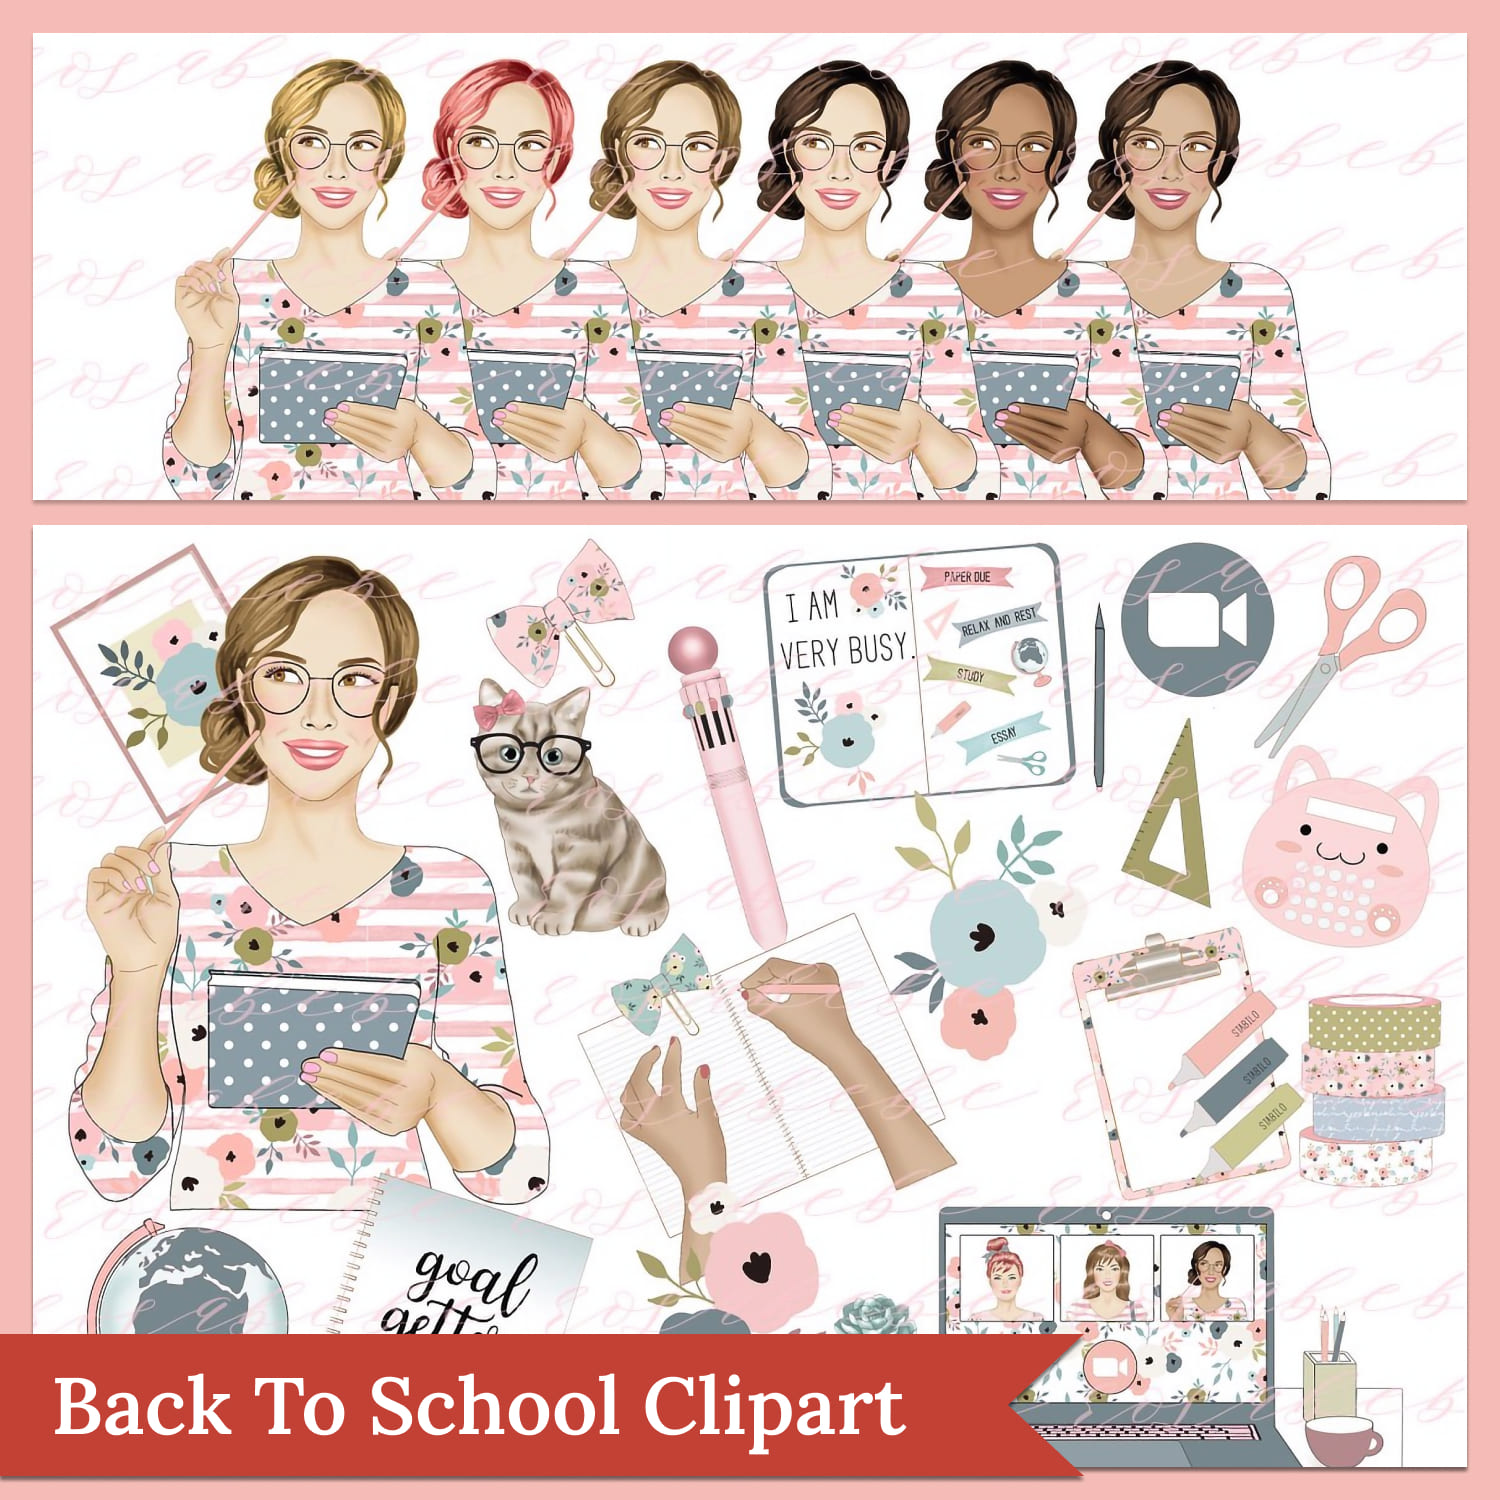 Back to school clipart - main image preview.